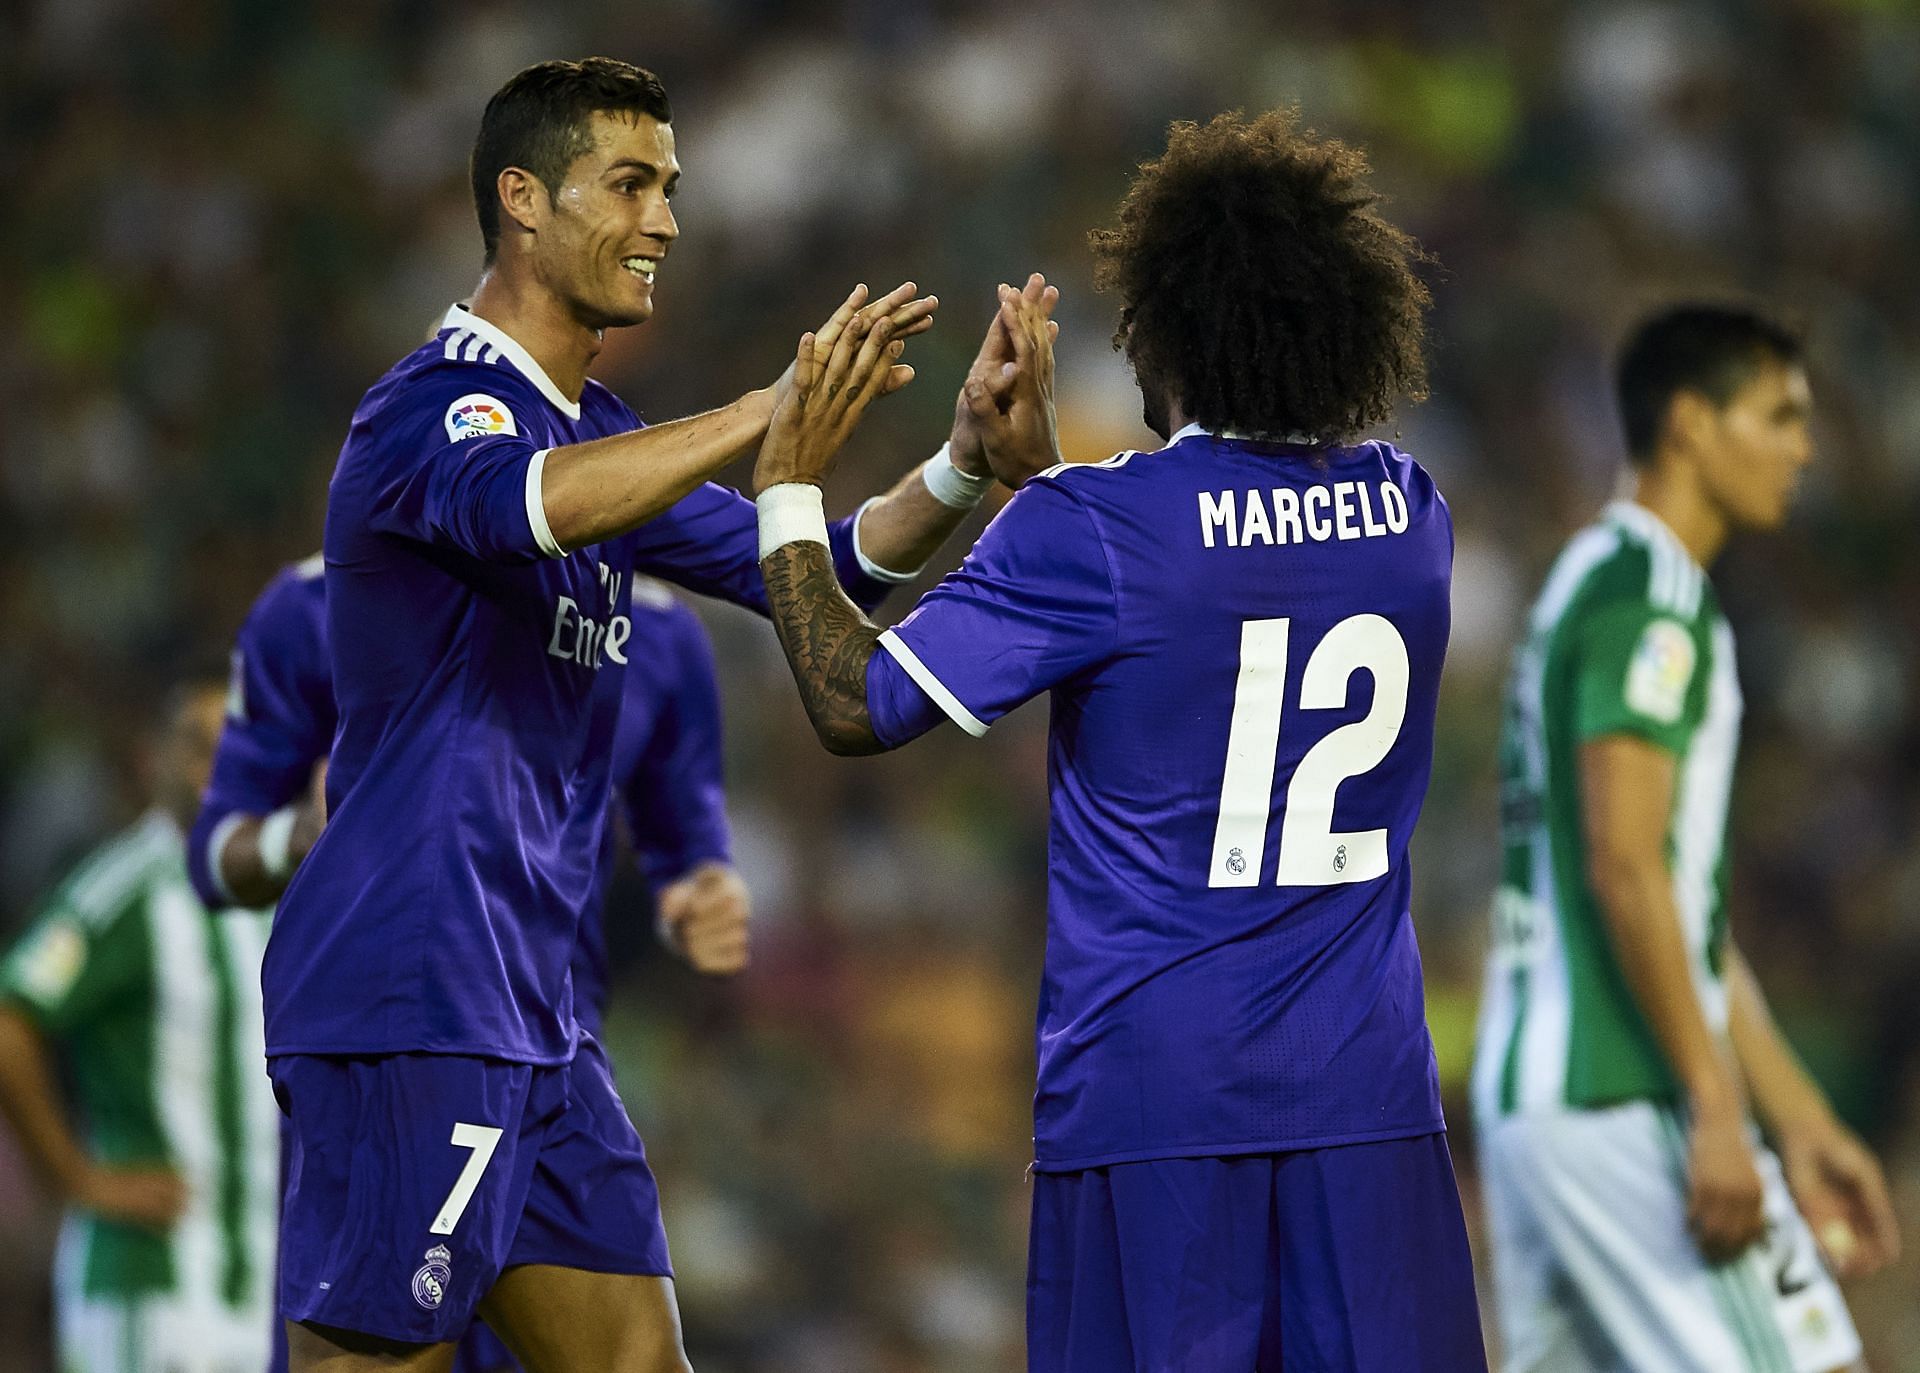 Cristiano Ronaldo and Marcelo formed a great partnership at Real Madrid